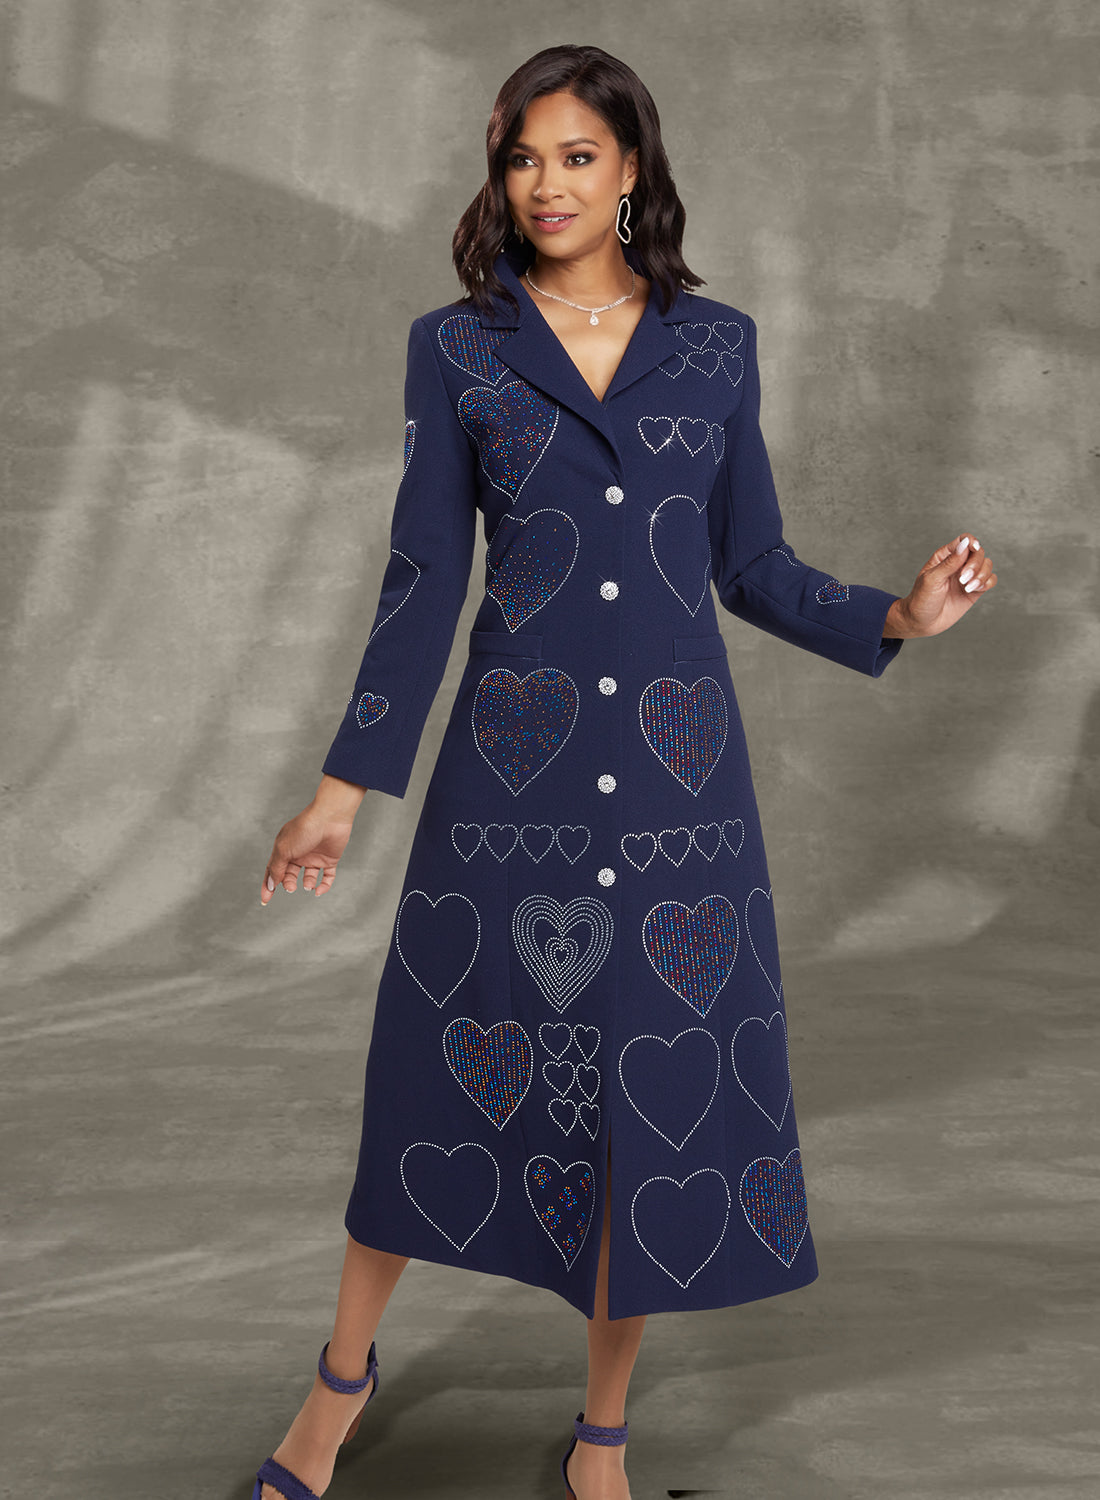 Donna Vinci 5775 - 1PC Navy Dress With Novelty Crepe Fabric Embellished with Rhinestones